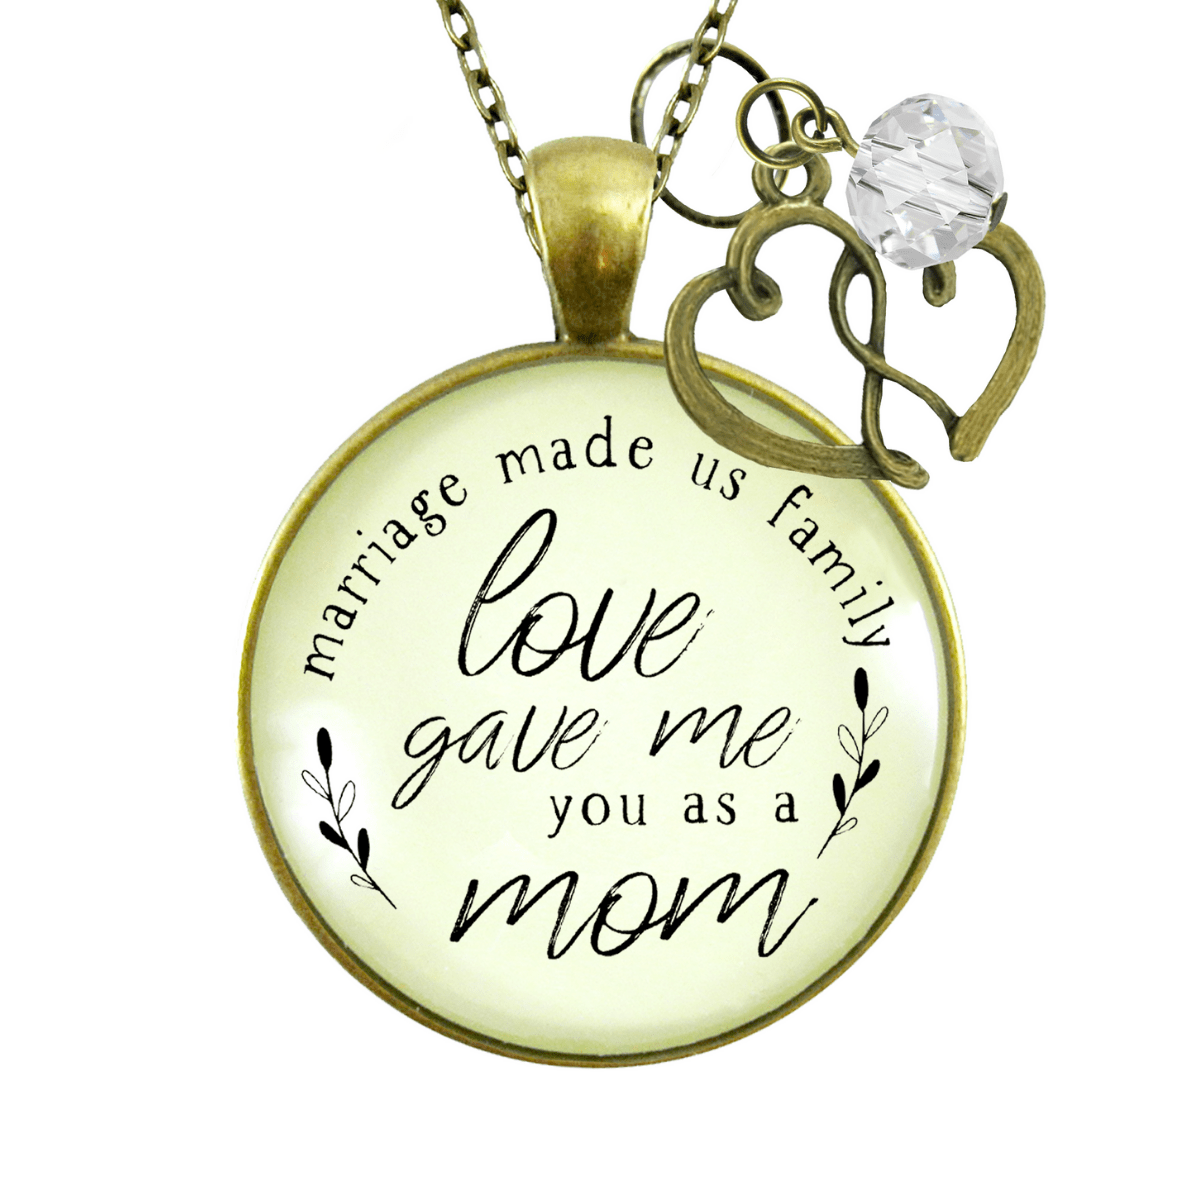 Gutsy Goodness Mother in Law Necklace Blended Family Step Mom Gift Wedding Jewelry - Gutsy Goodness Handmade Jewelry;Mother In Law Necklace Blended Family Step Mom Gift Wedding Jewelry - Gutsy Goodness Handmade Jewelry Gifts